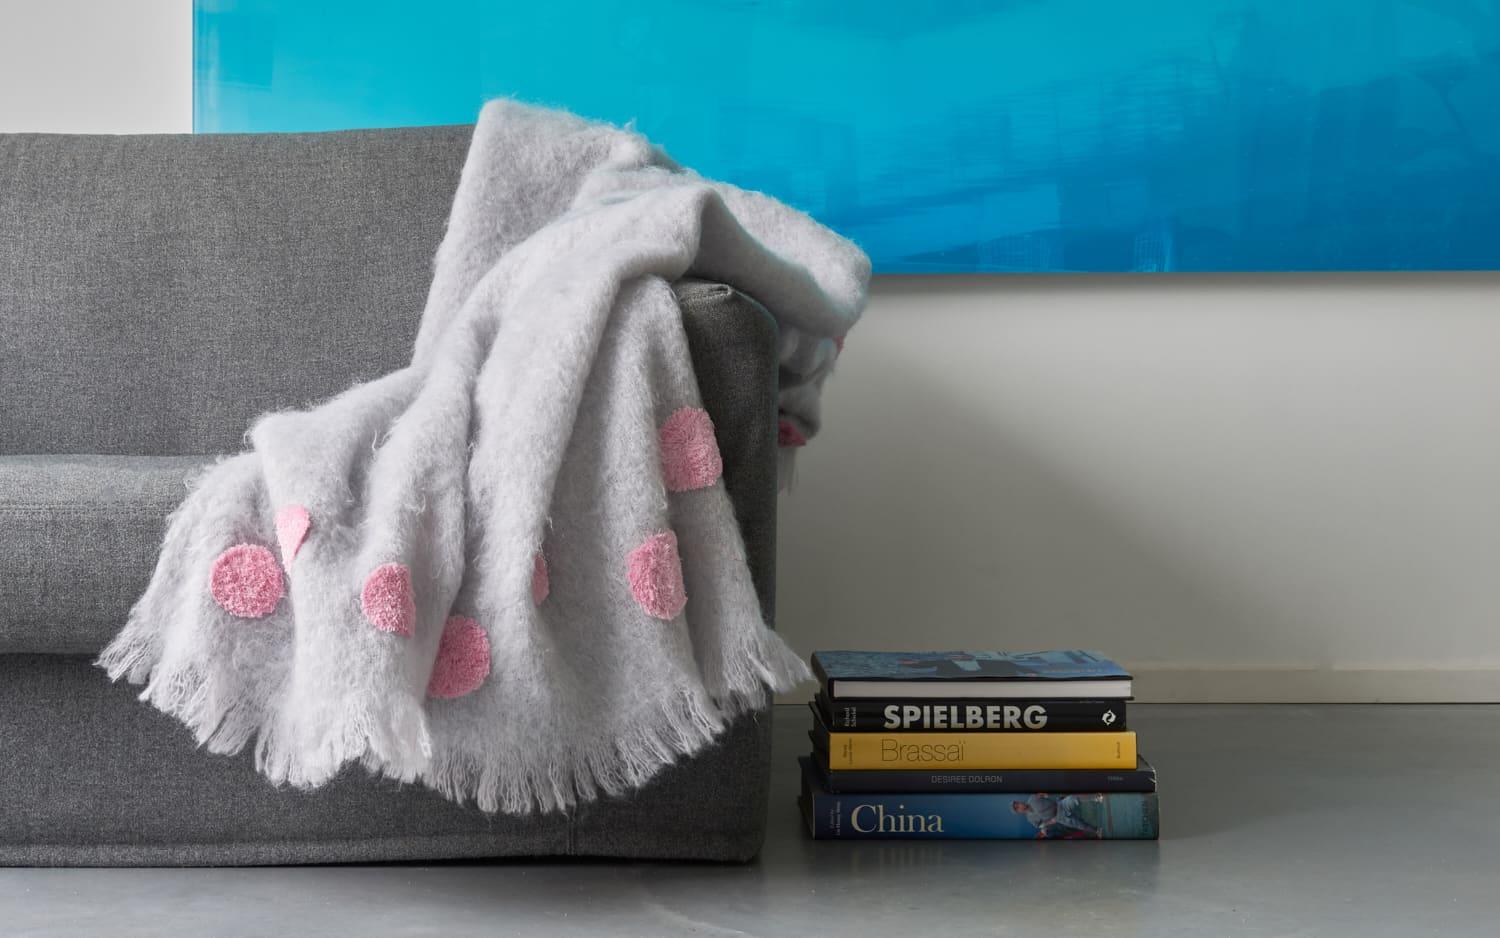 Otago, a beautiful pearl grey throw blanket made of the finest New Zealand mohair. Characterised with pink big dots, completely embroidered by hand. A tone-on-tone fringe runs along the border. A throw like this, can transform instantly a space. 
We